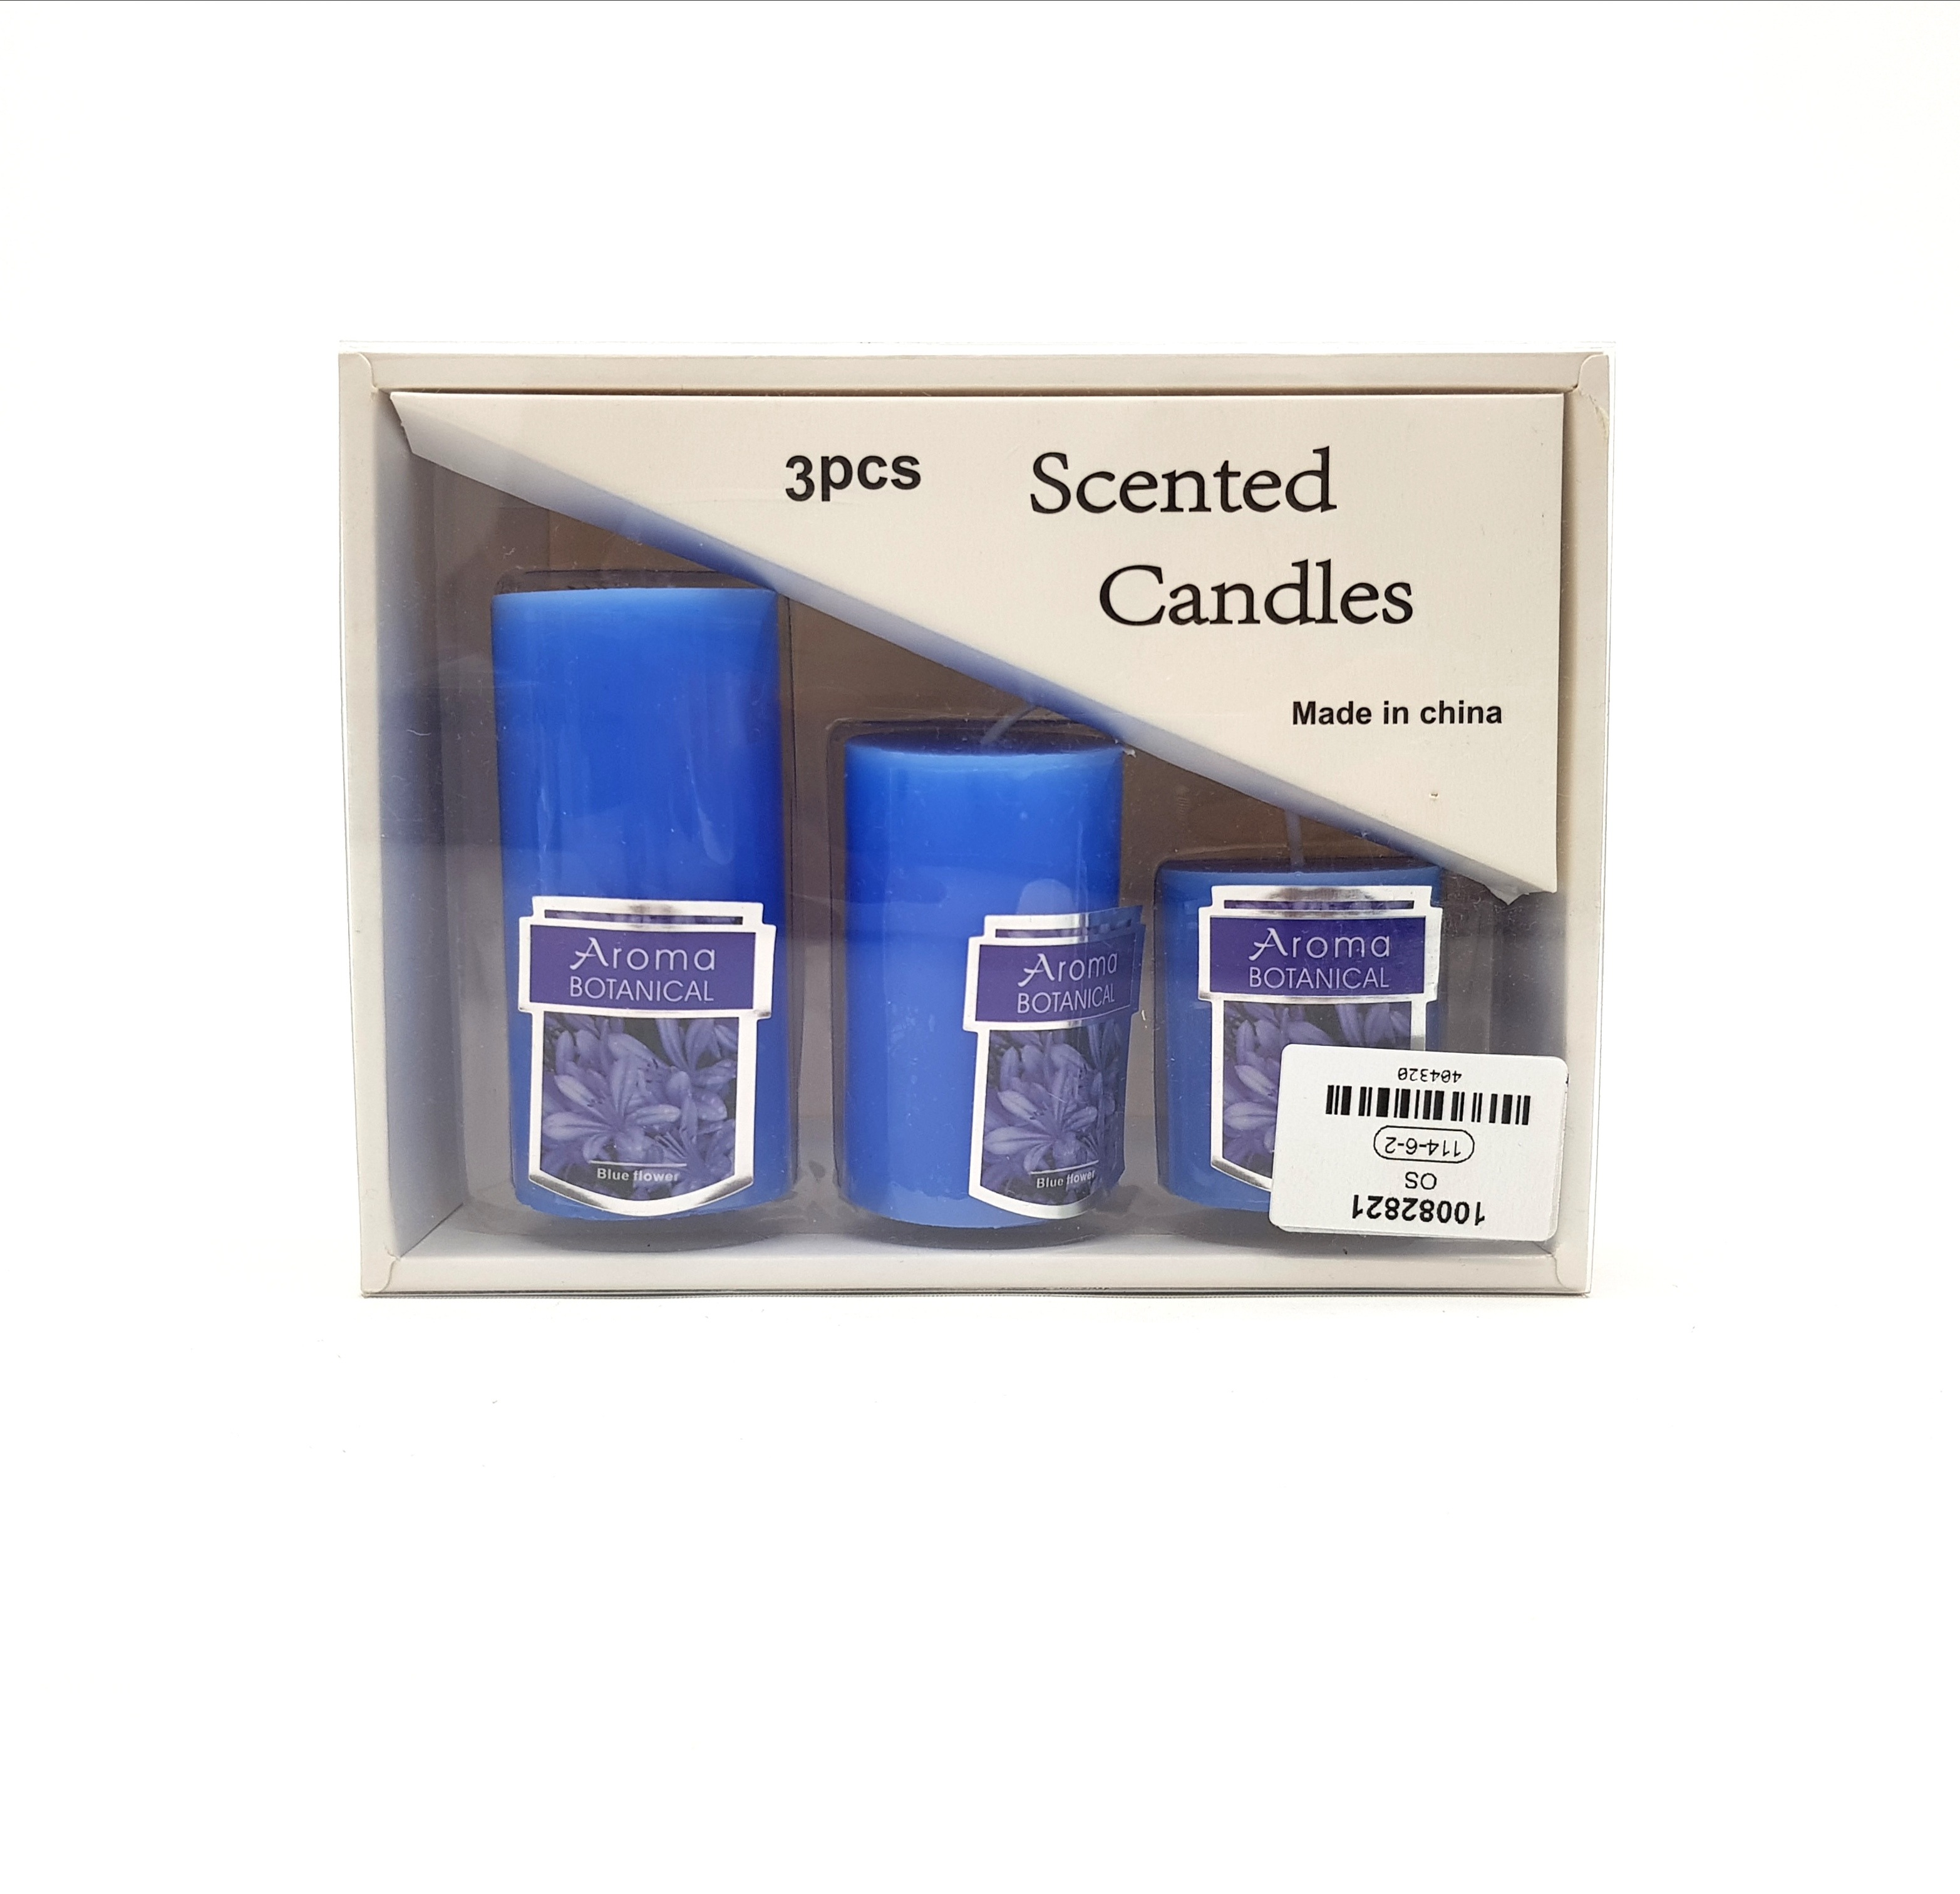 3 Pcs Scented Candles Pack